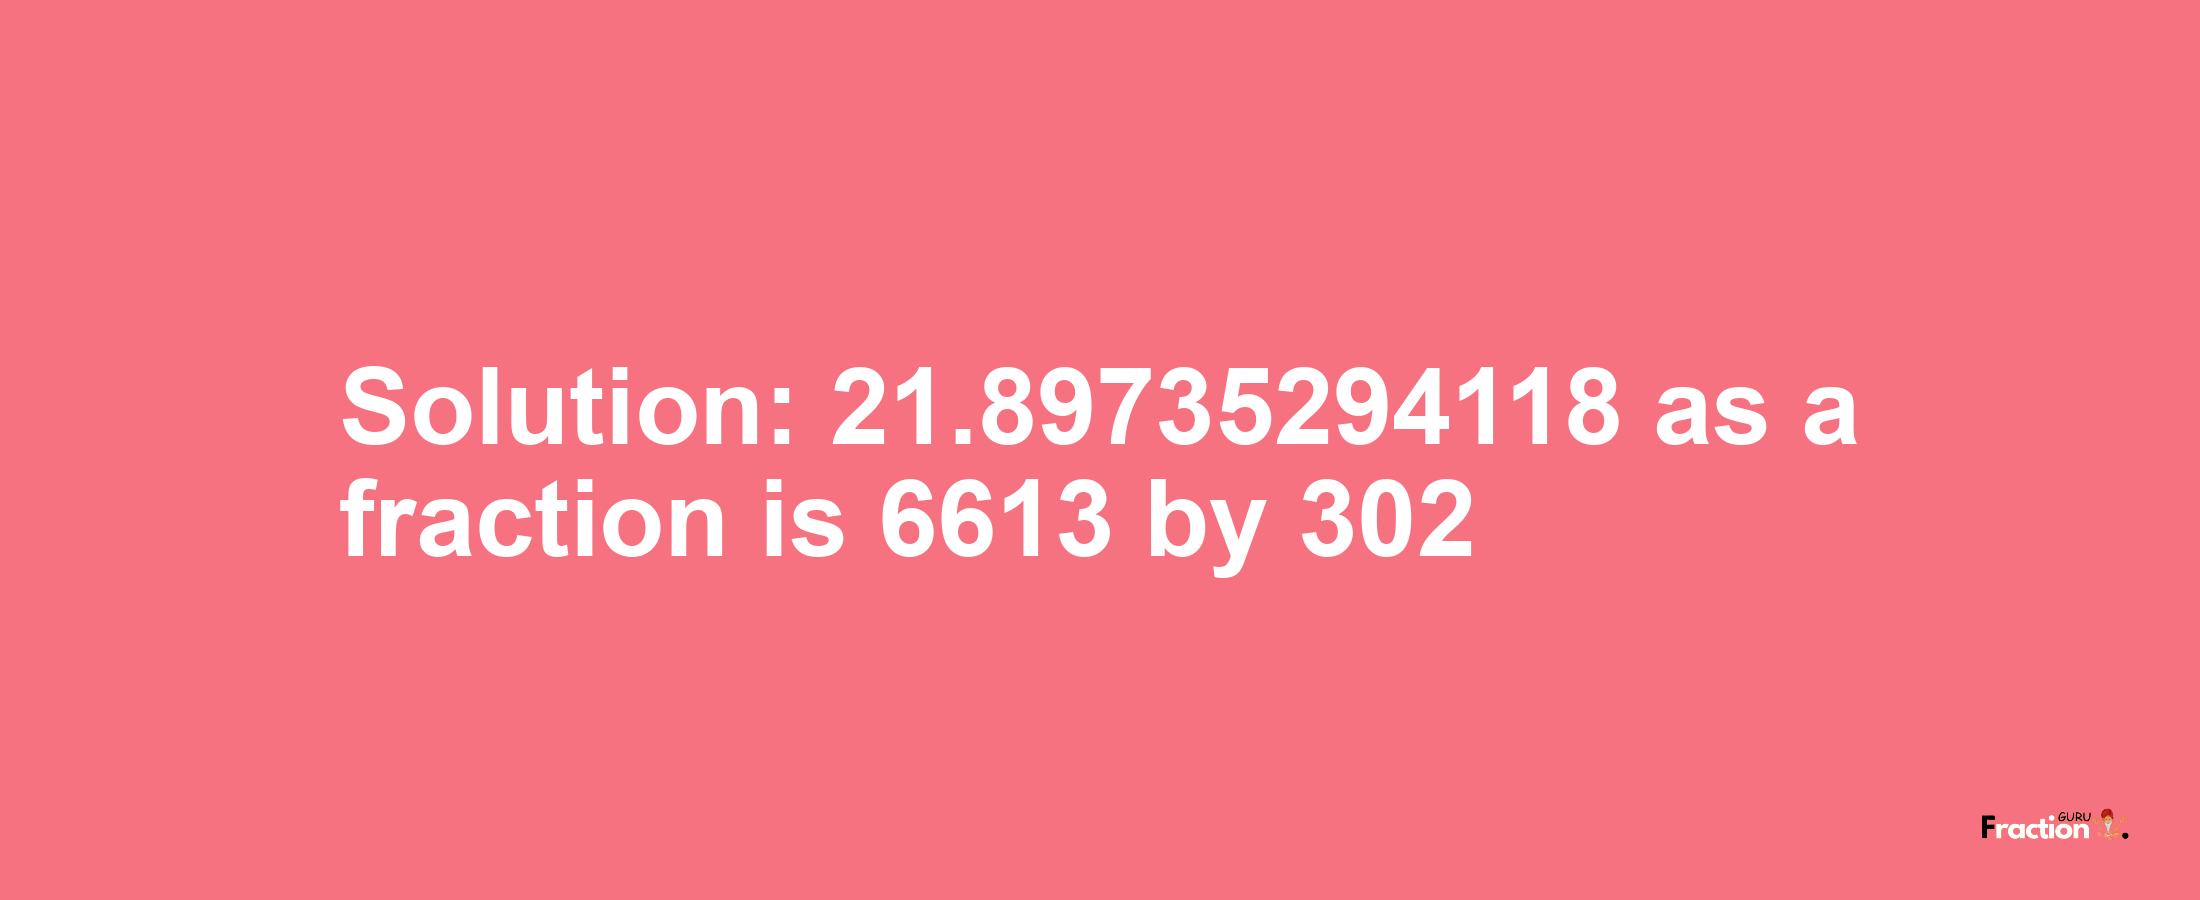 Solution:21.89735294118 as a fraction is 6613/302